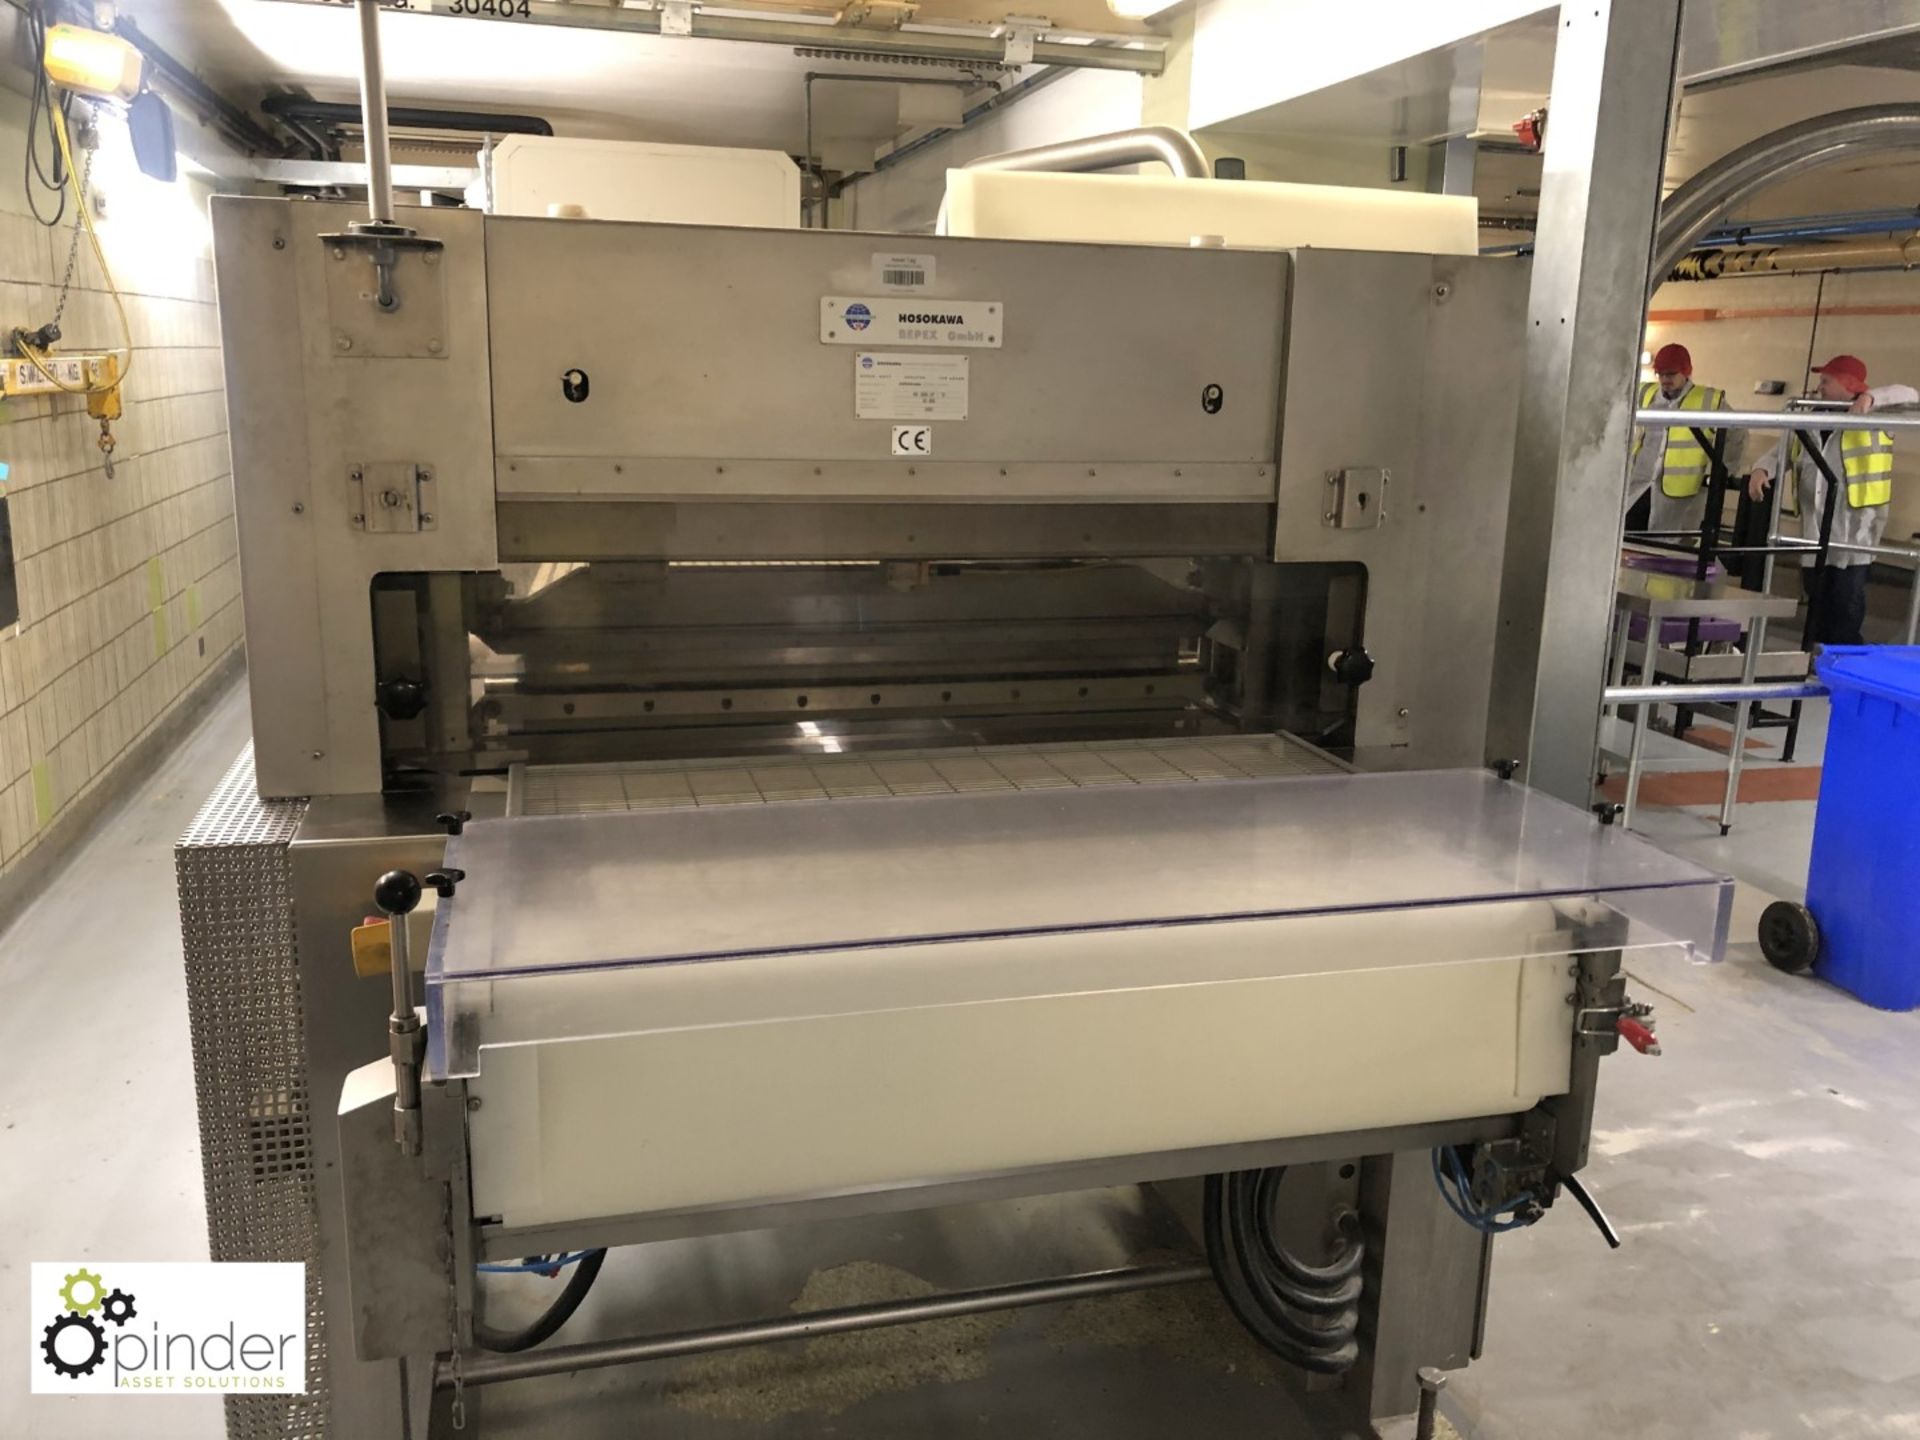 Hosokawa MS 1000 EP/TB Guillotine, serial number 52600, with inbuilt conveyor (please note there